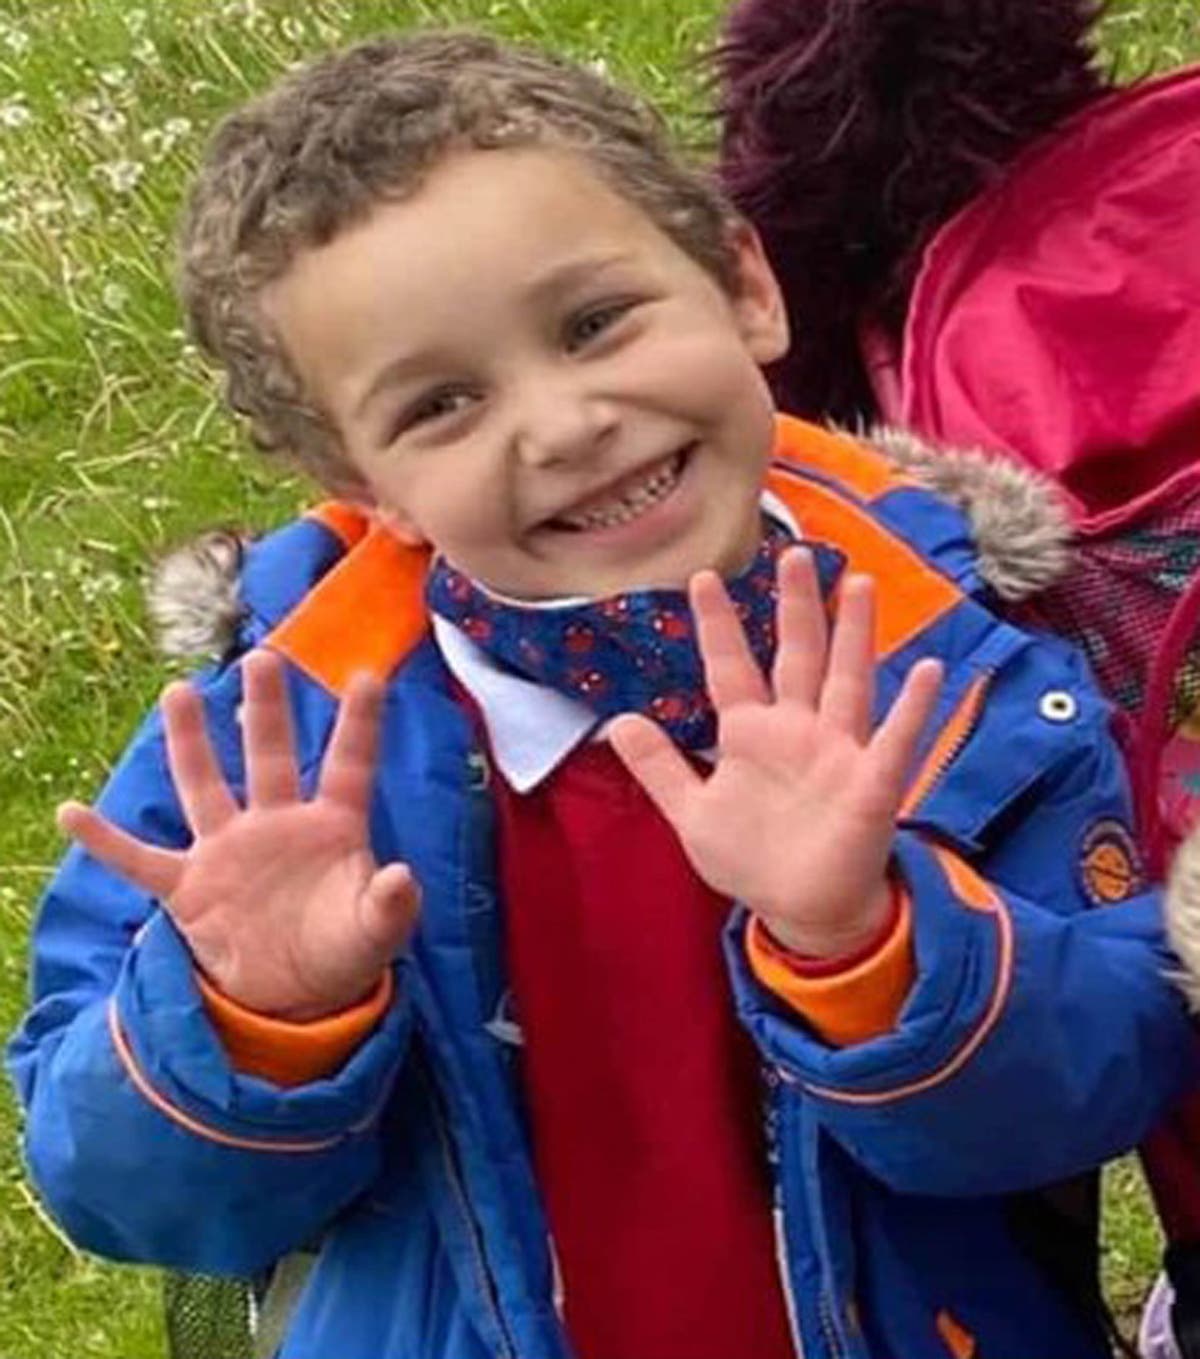 Mother and step-father jailed for murdering five-year-old boy found dead in river